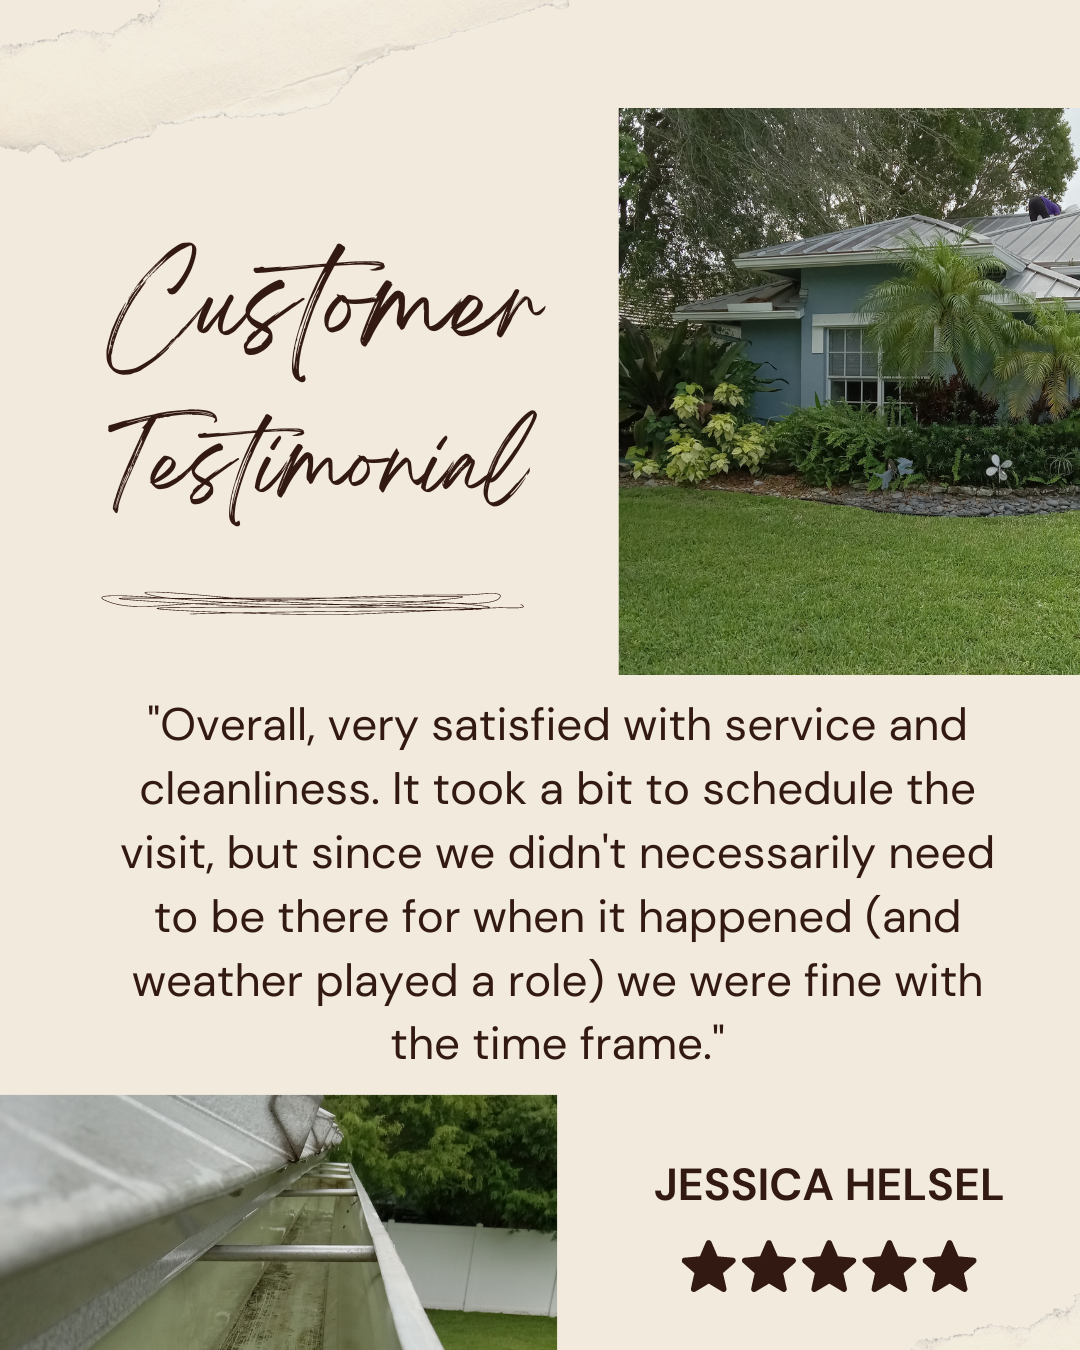 Jessica from Little Rock,AR gives us a 5 star review for a recent gutter cleaning service.